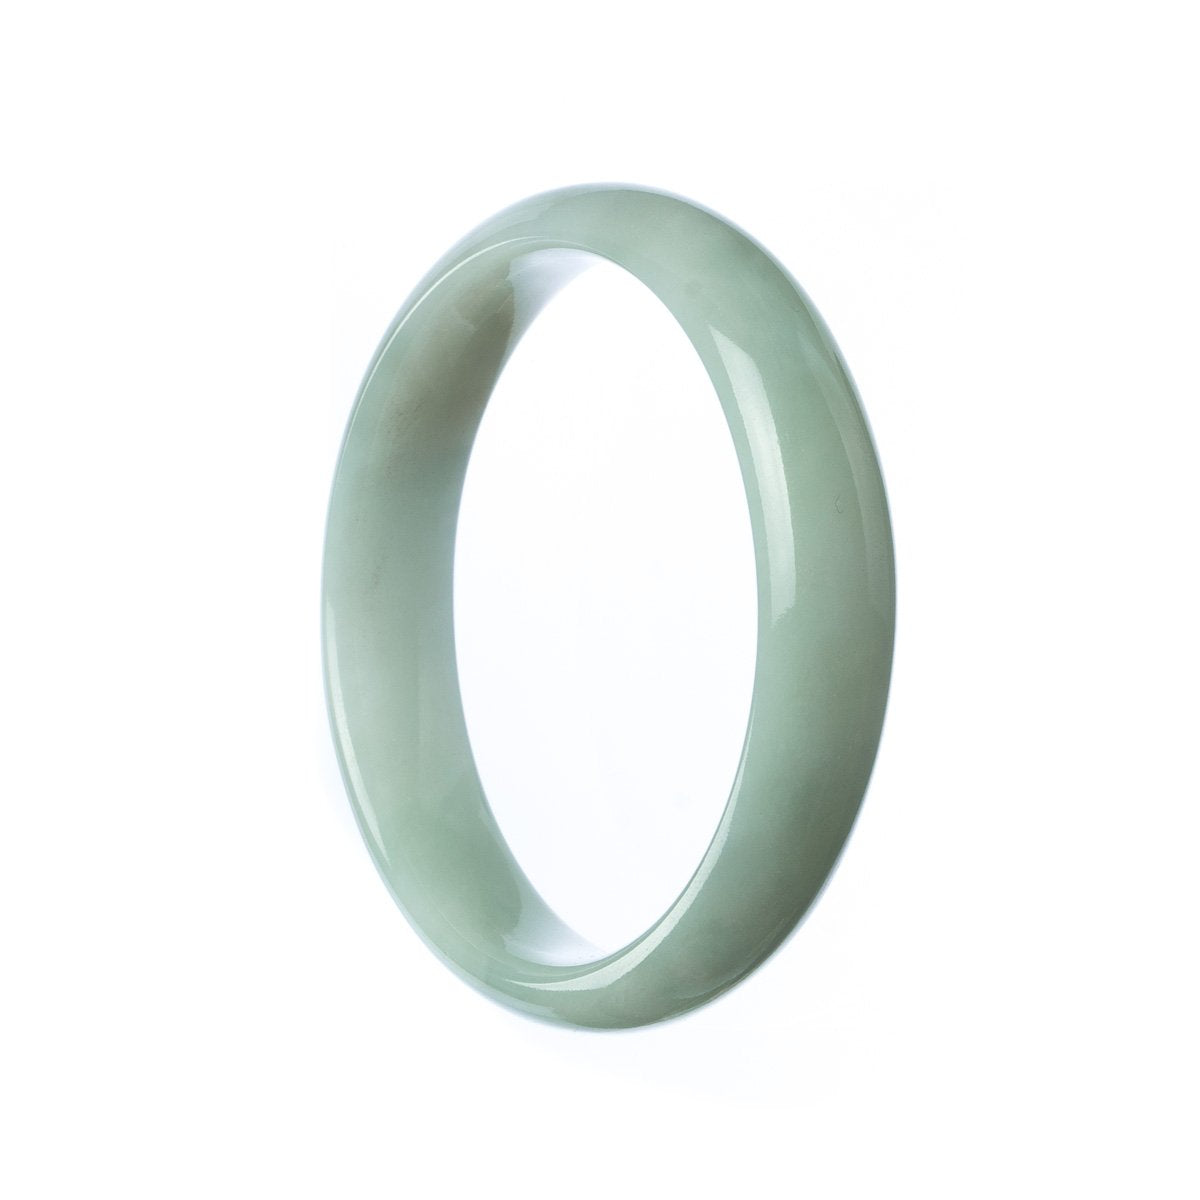 A close-up image of a pale green jade bangle bracelet with a smooth, half-moon shape. The bracelet is made of genuine untreated jade and measures 54mm in diameter. The MAYS™ logo is engraved on the inner side.